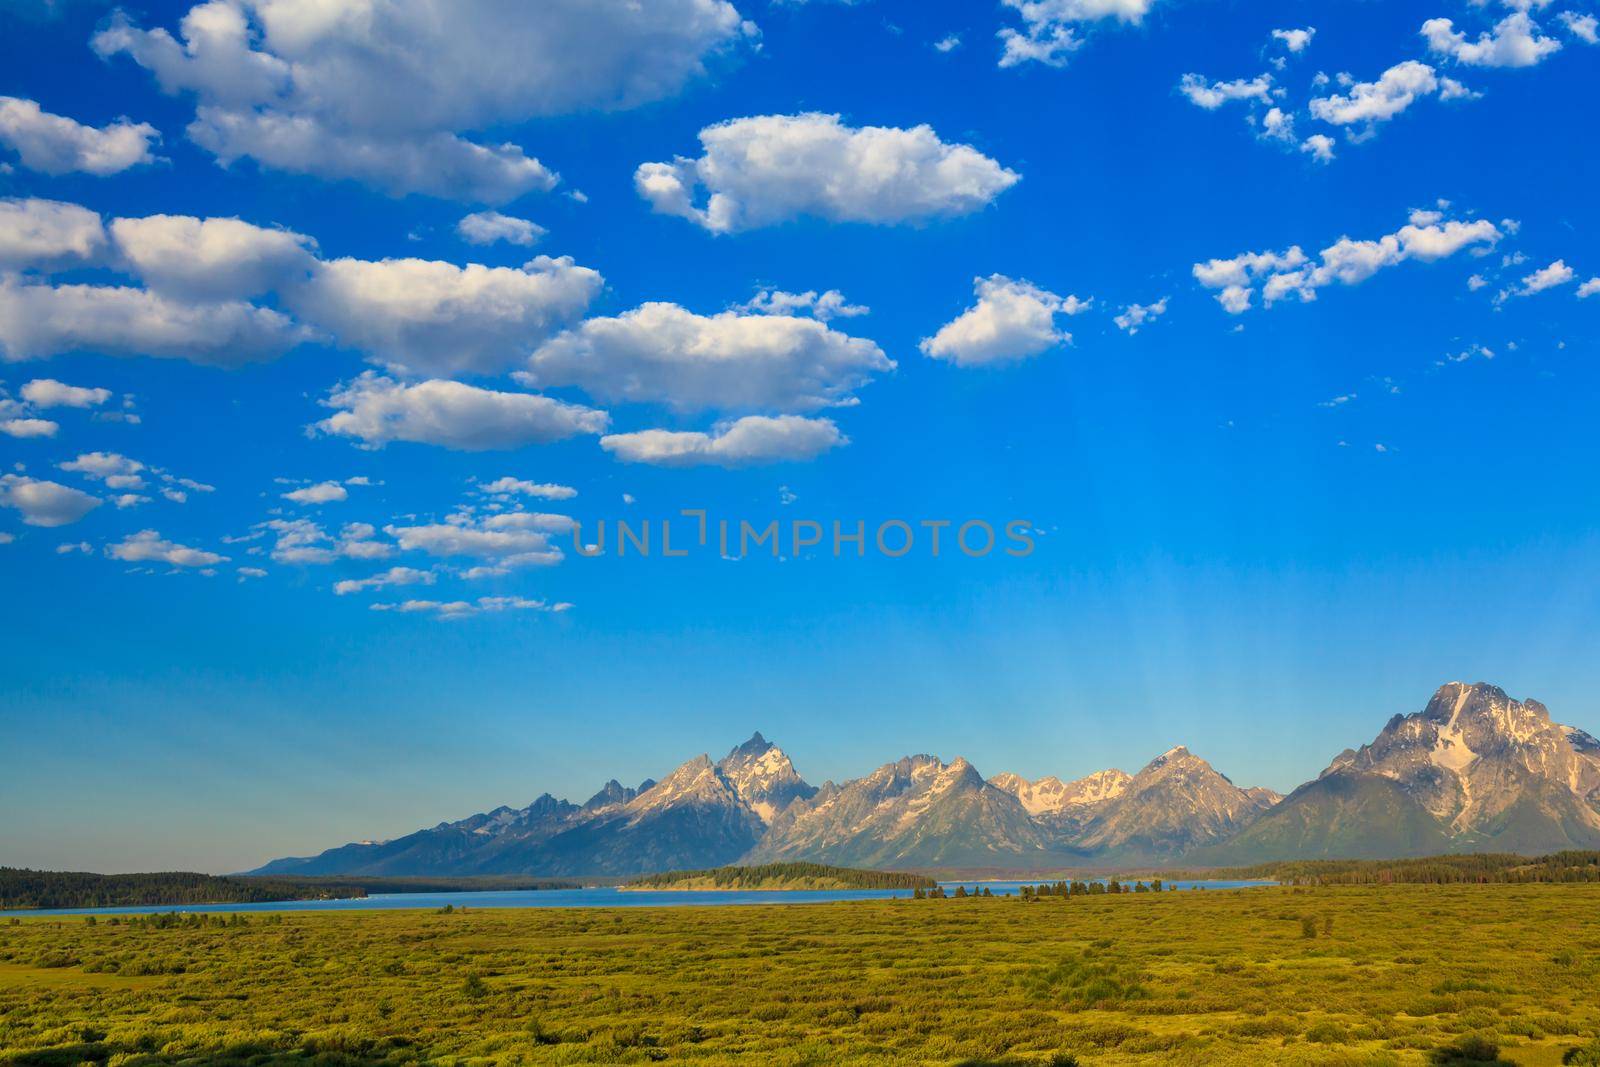 Jackson Lake in front of Teton Range in Grand Teton National Park.  Taken in early morning, blue sky with spotty cloud